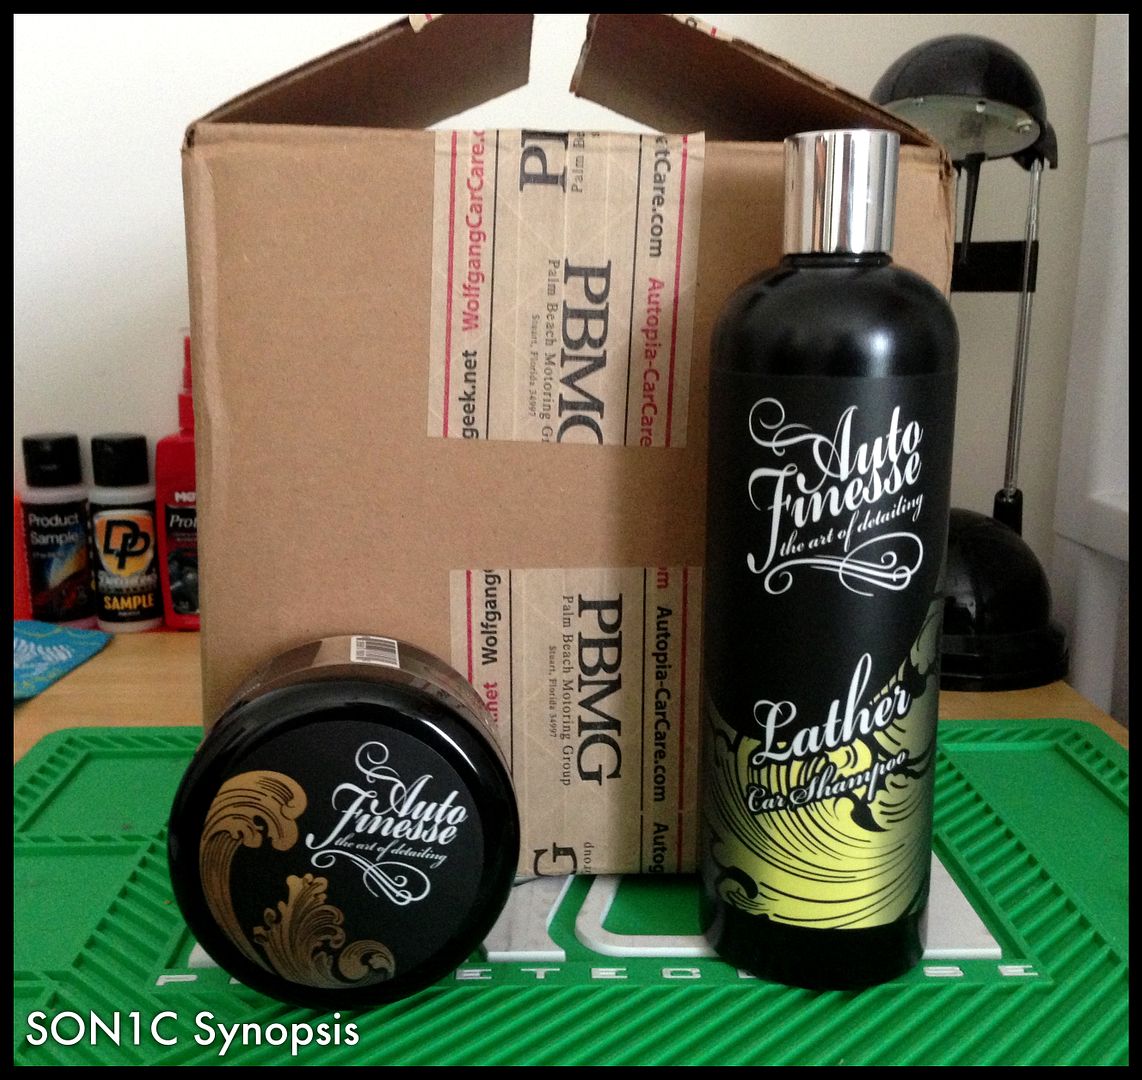 Son1c Synopsis 48 Auto Finesse Lather Car Shampoo Review